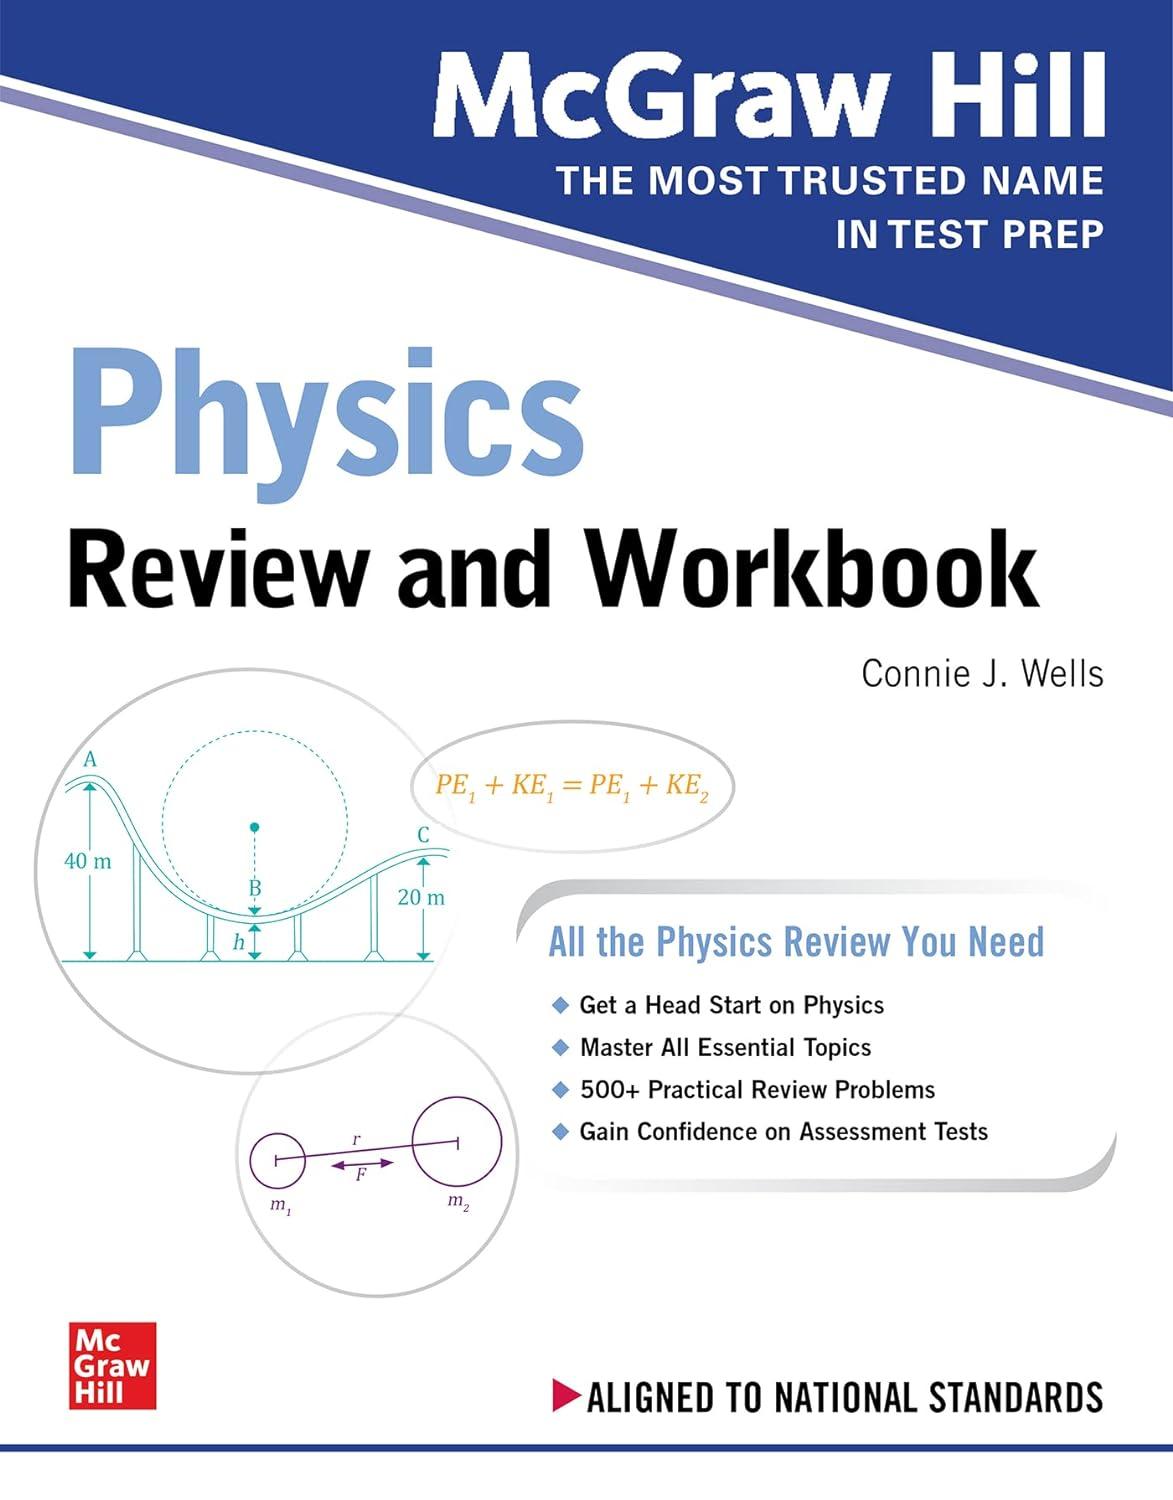 mcgraw hill physics review and workbook 1st edition connie wells 1264264089, 978-1264264087